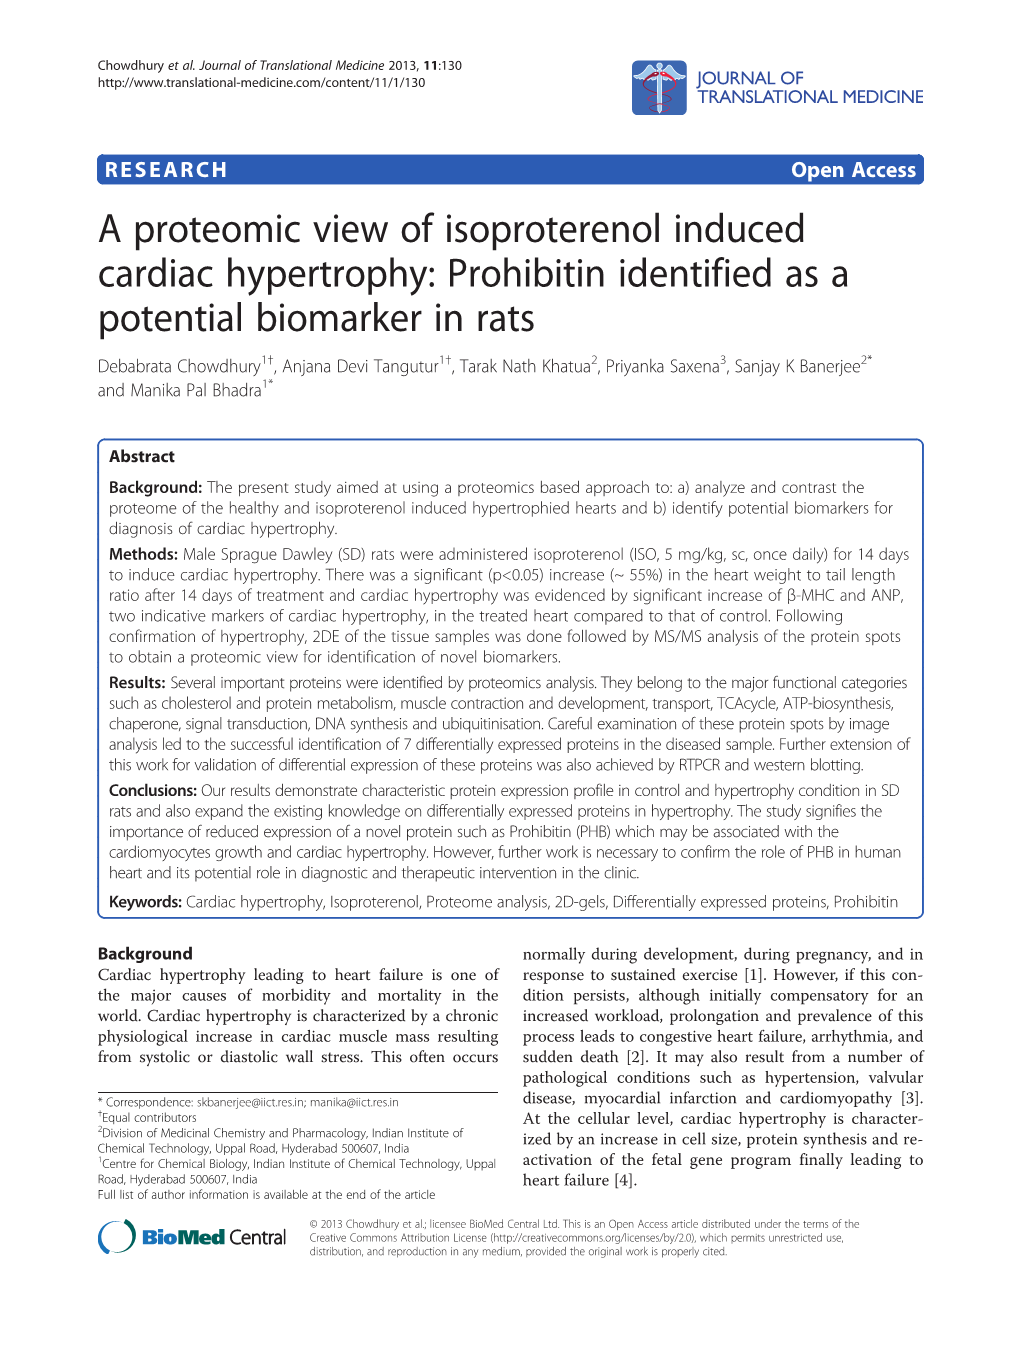 A Proteomic View of Isoproterenol